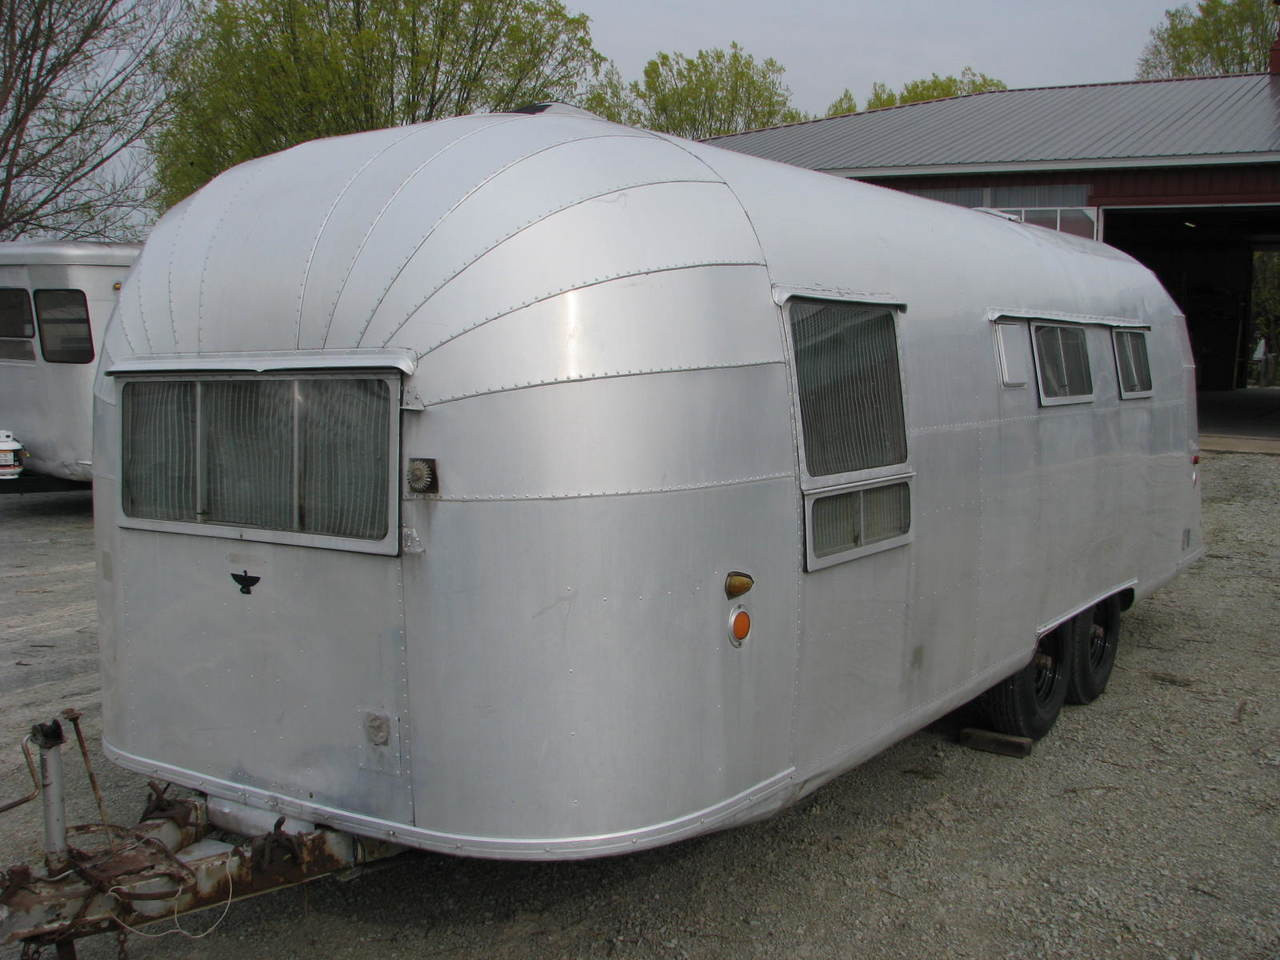 1956 Airstream 26' Overlander - Whale Tail  #6697               (SOLD)